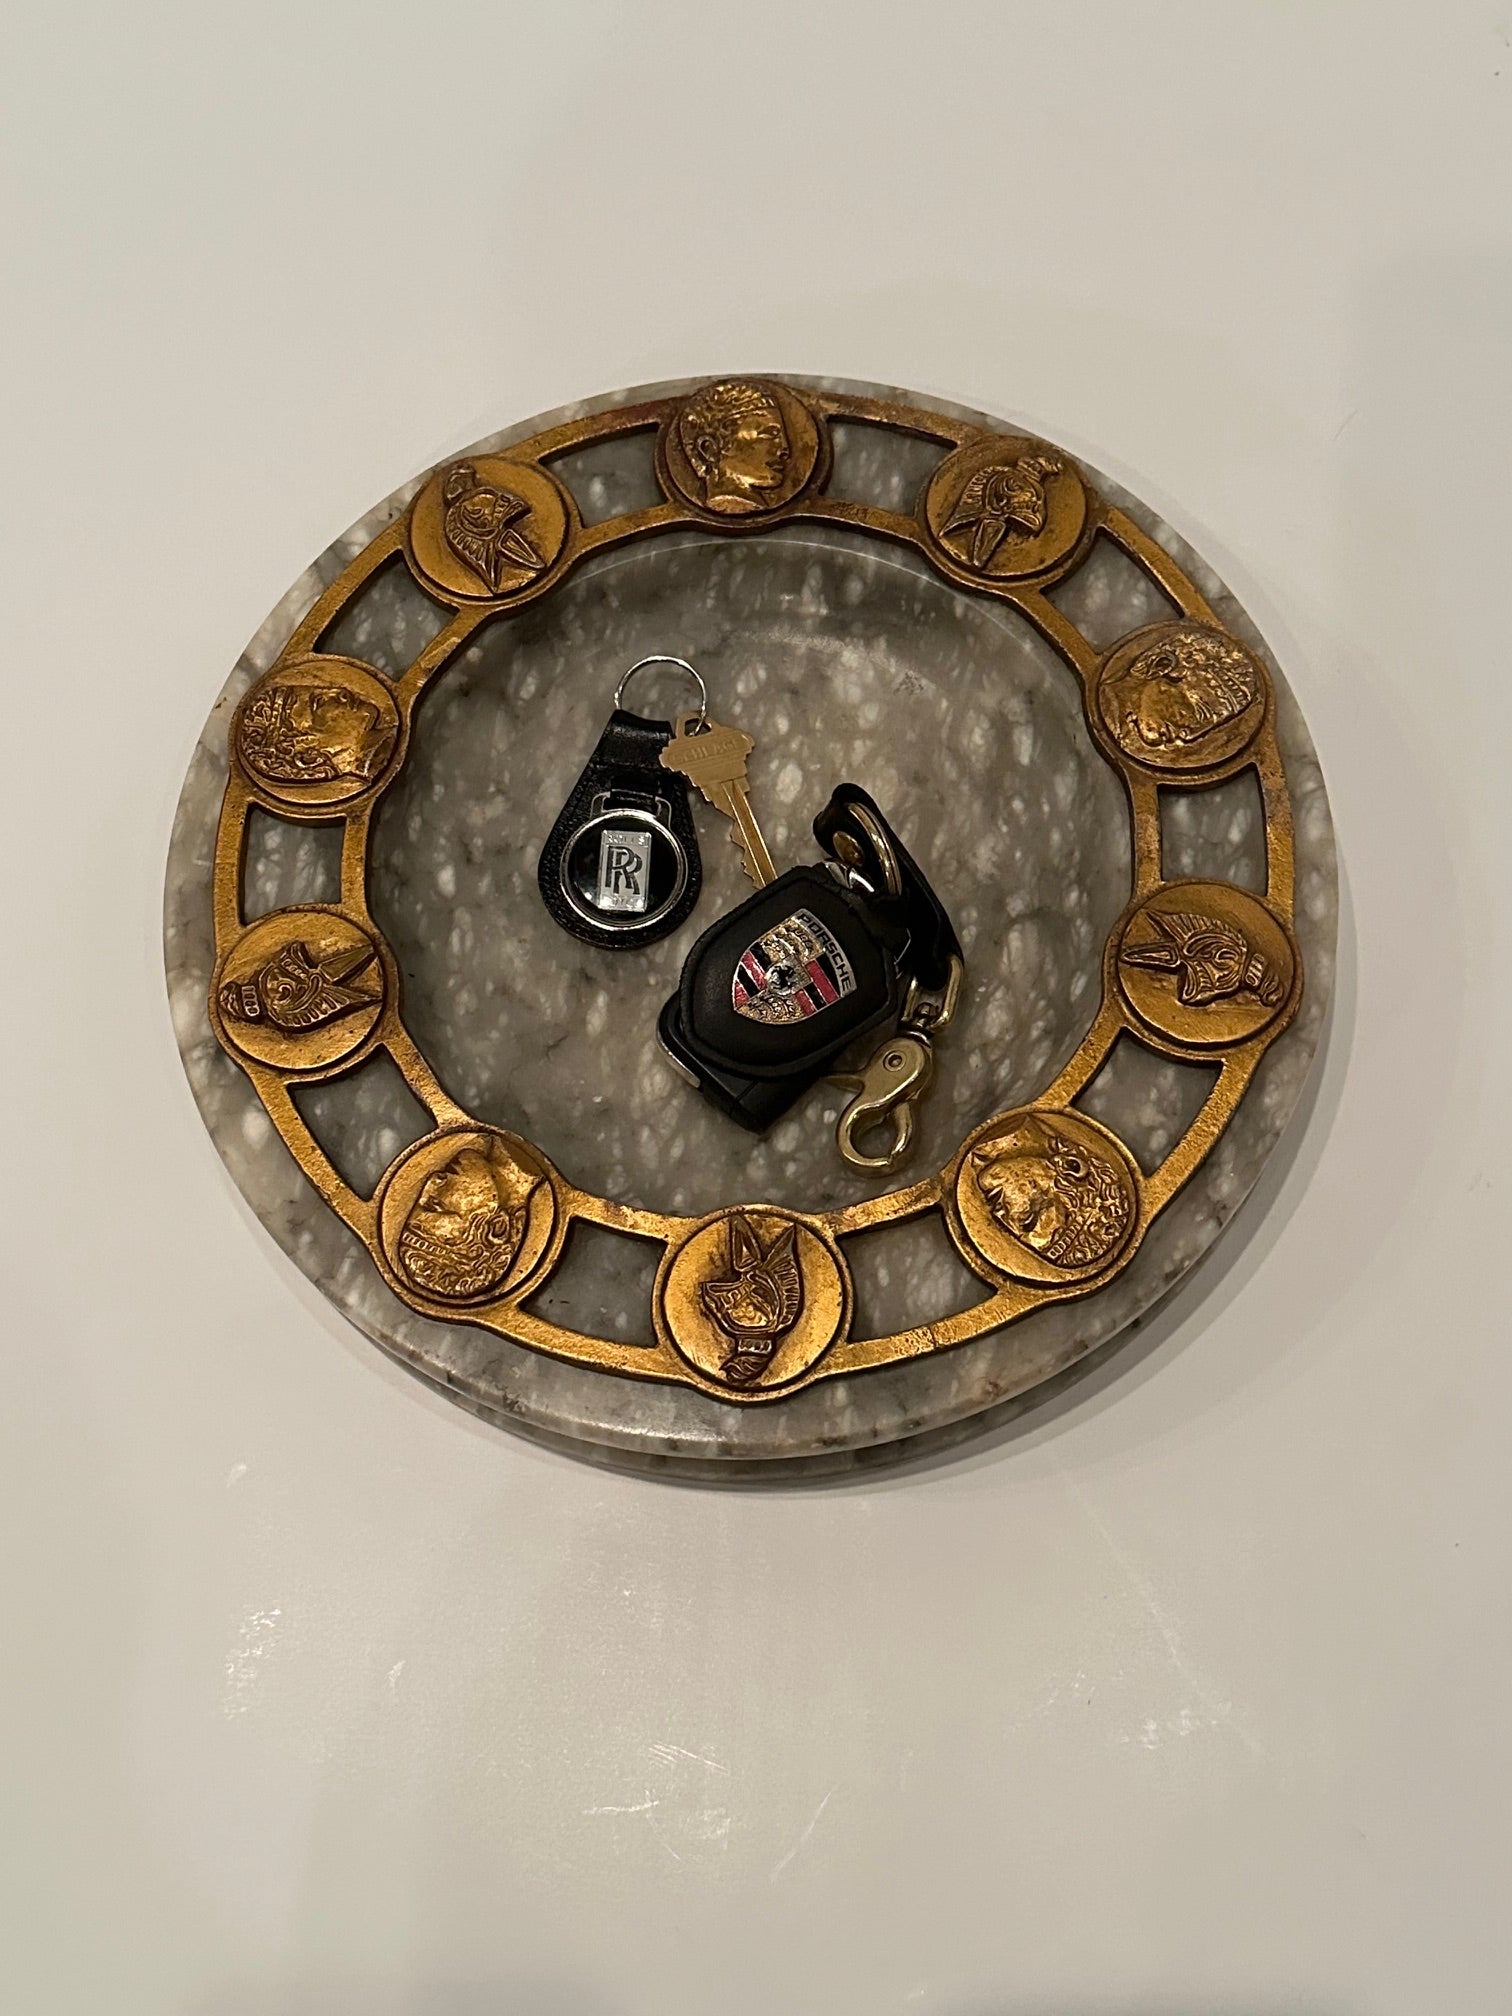 Super stylish round marble ashtray having Neoclassical Roman motif decoration in gilt metal around the periphery.  Great resting spot for your keys!